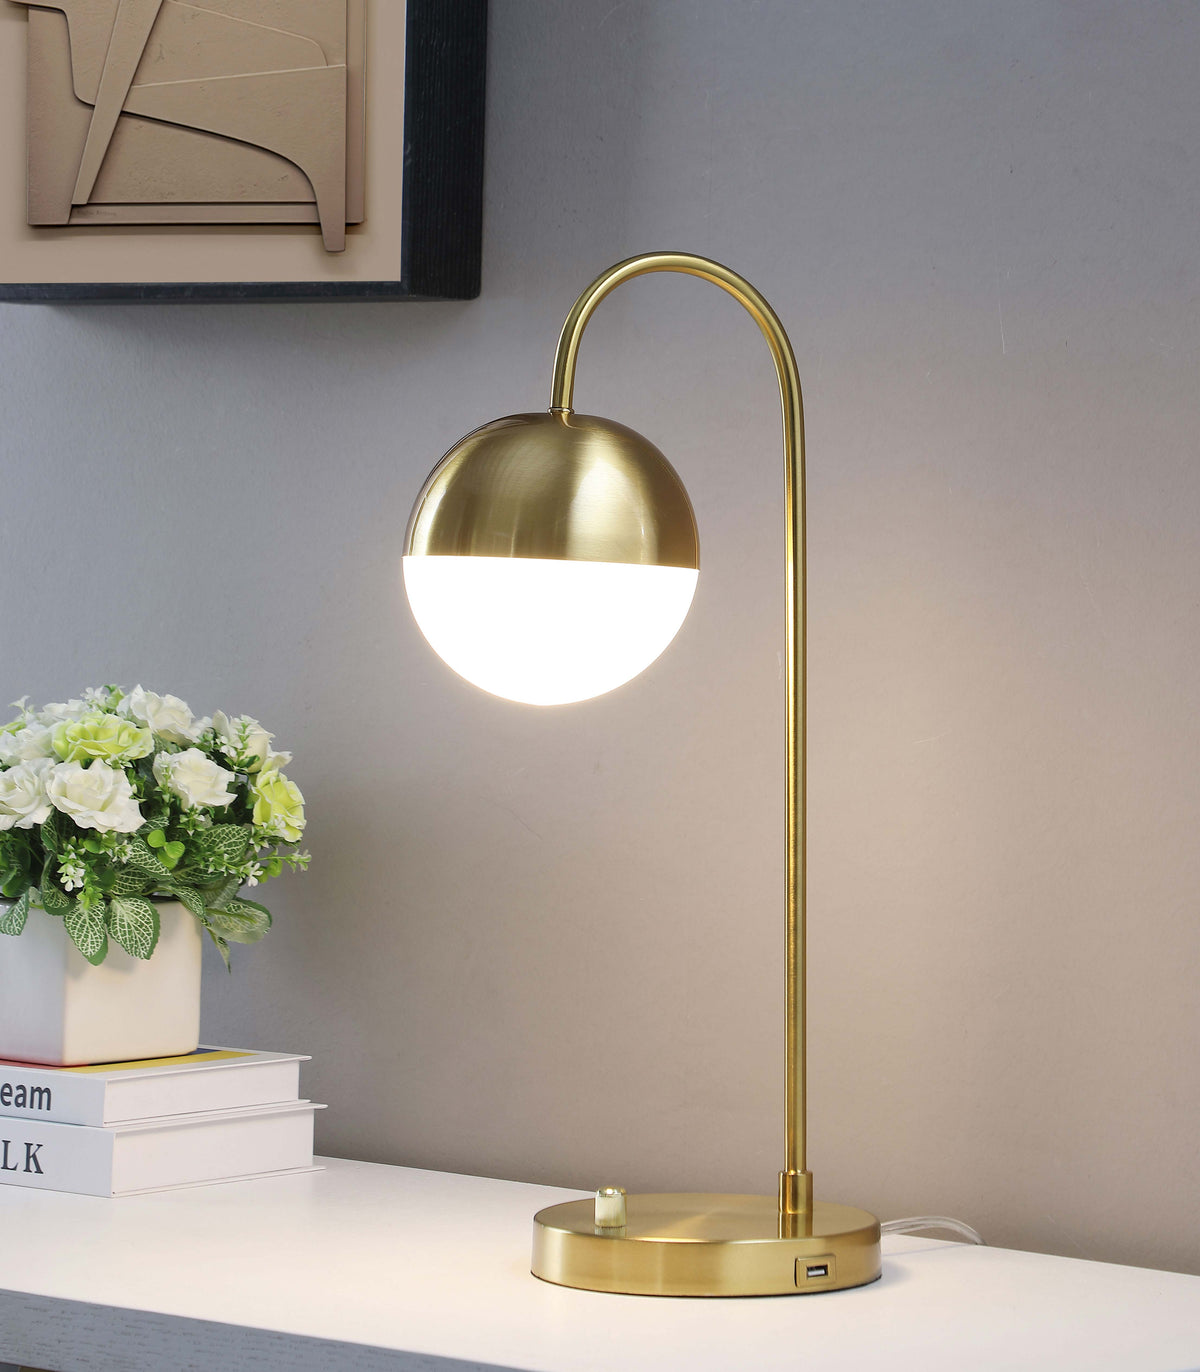 Merrick Round Arched Table Lamp Gold  Half Price Furniture